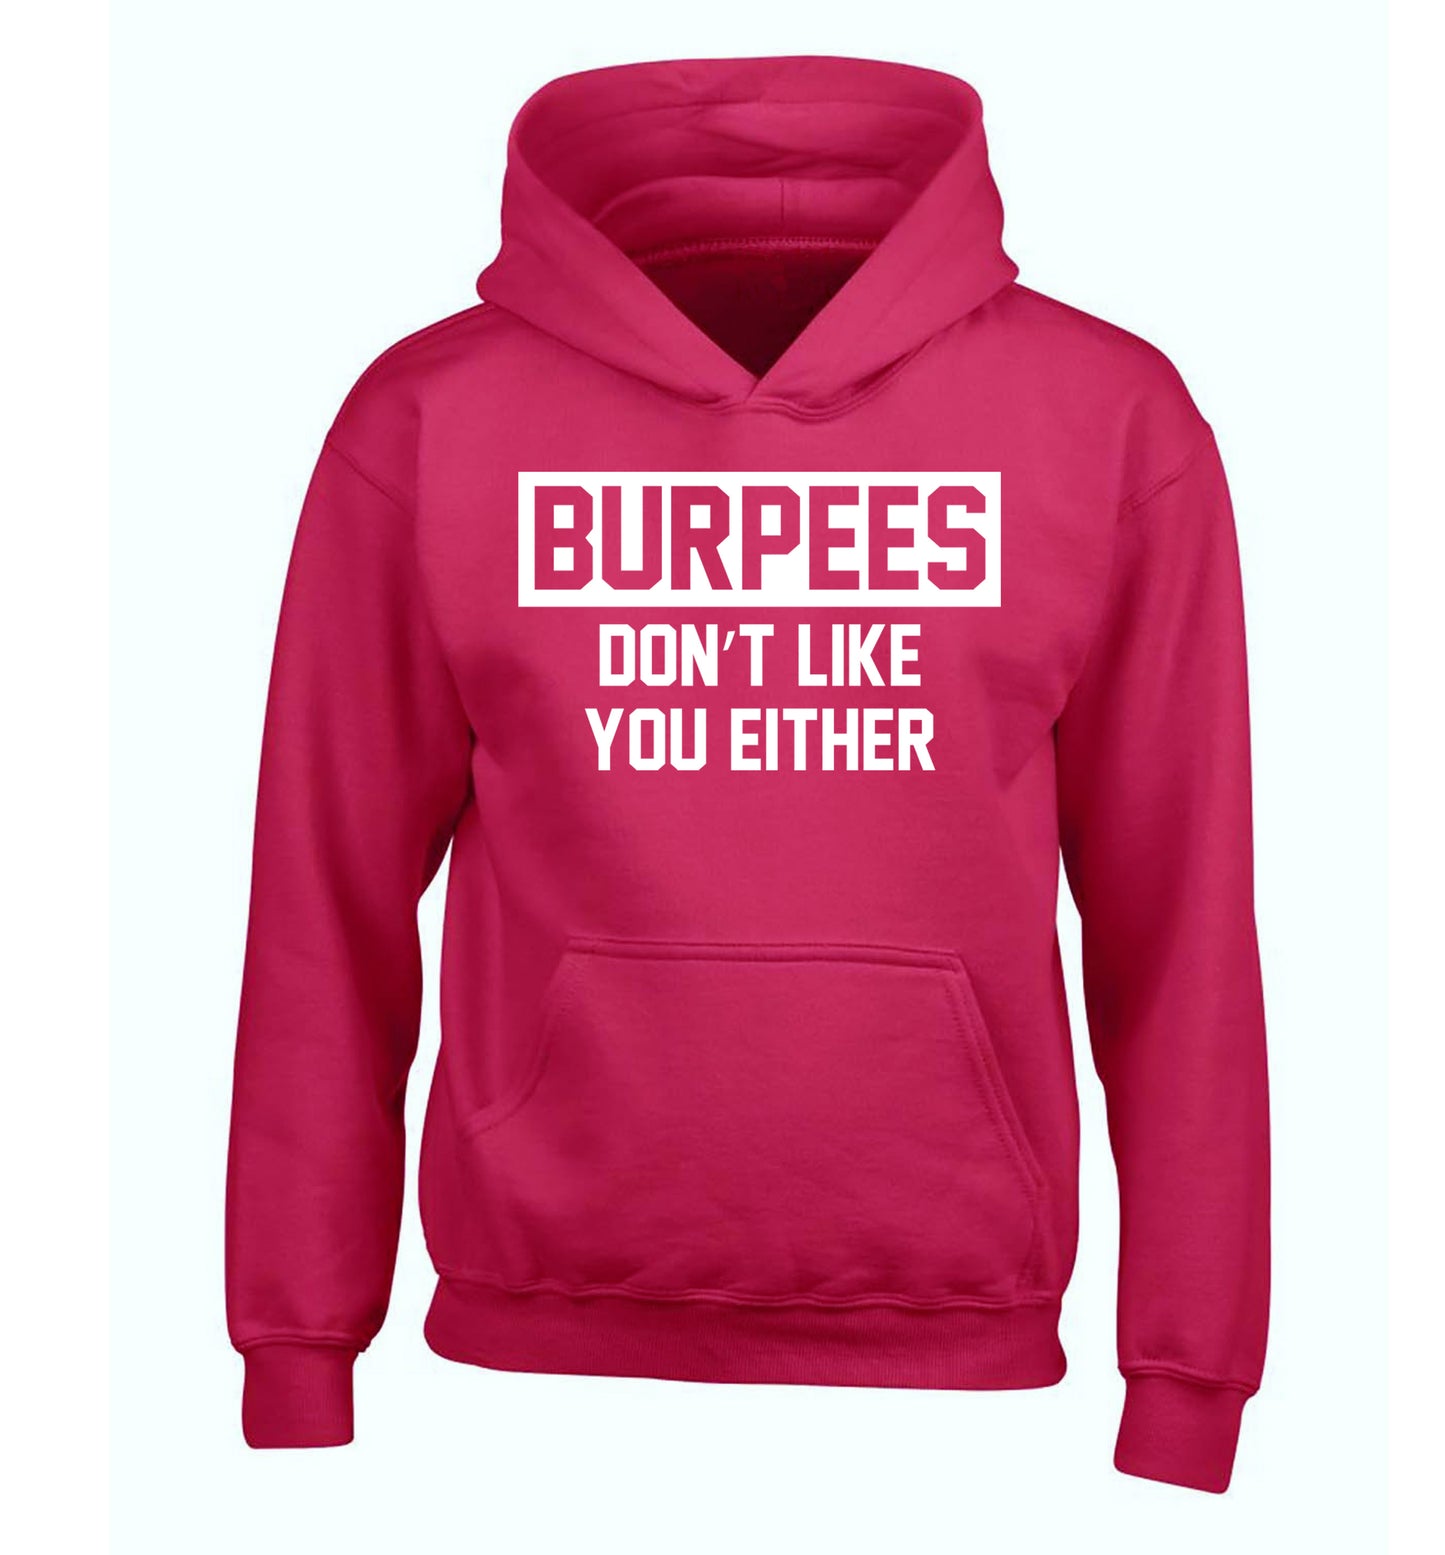 Burpees don't like you either children's pink hoodie 12-14 Years